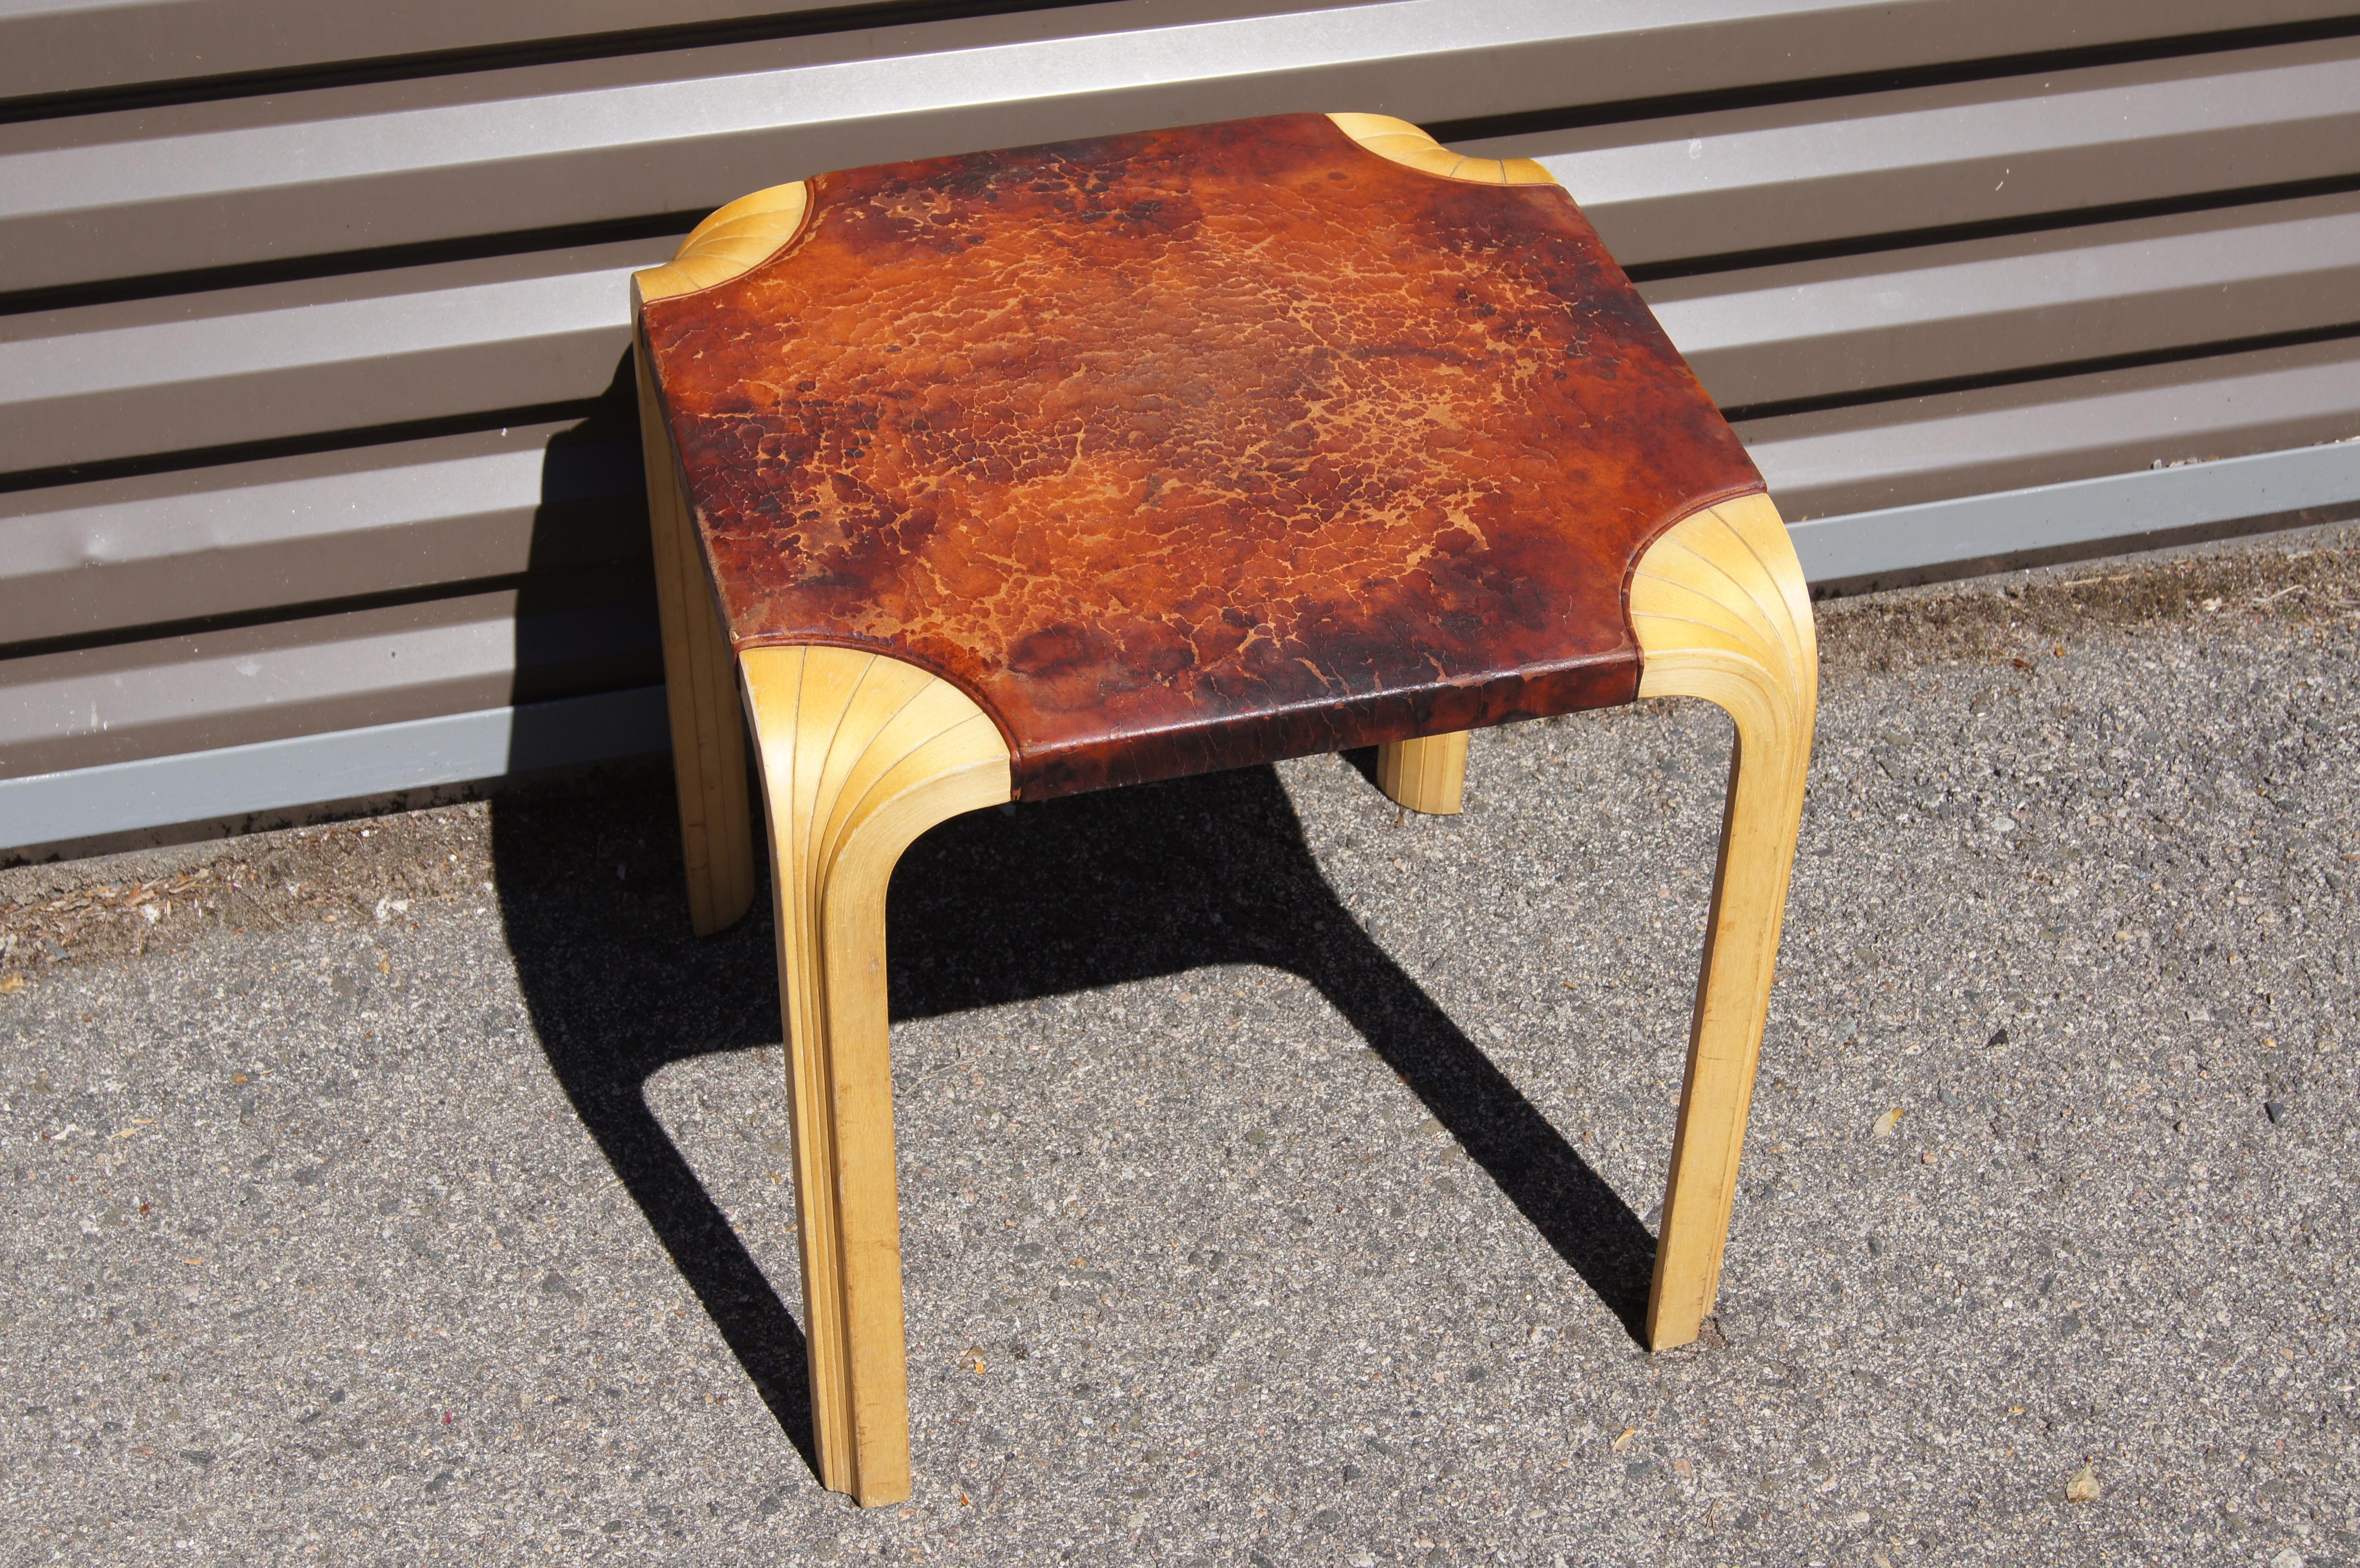 eatures a distinctive five-section fan of bent birchwood, whose joins cascade down the legs, and the original leather-wrapped top with a beautiful patina. The piece can serve as a side or occasional table or as a stool.

Maker's label on underside.